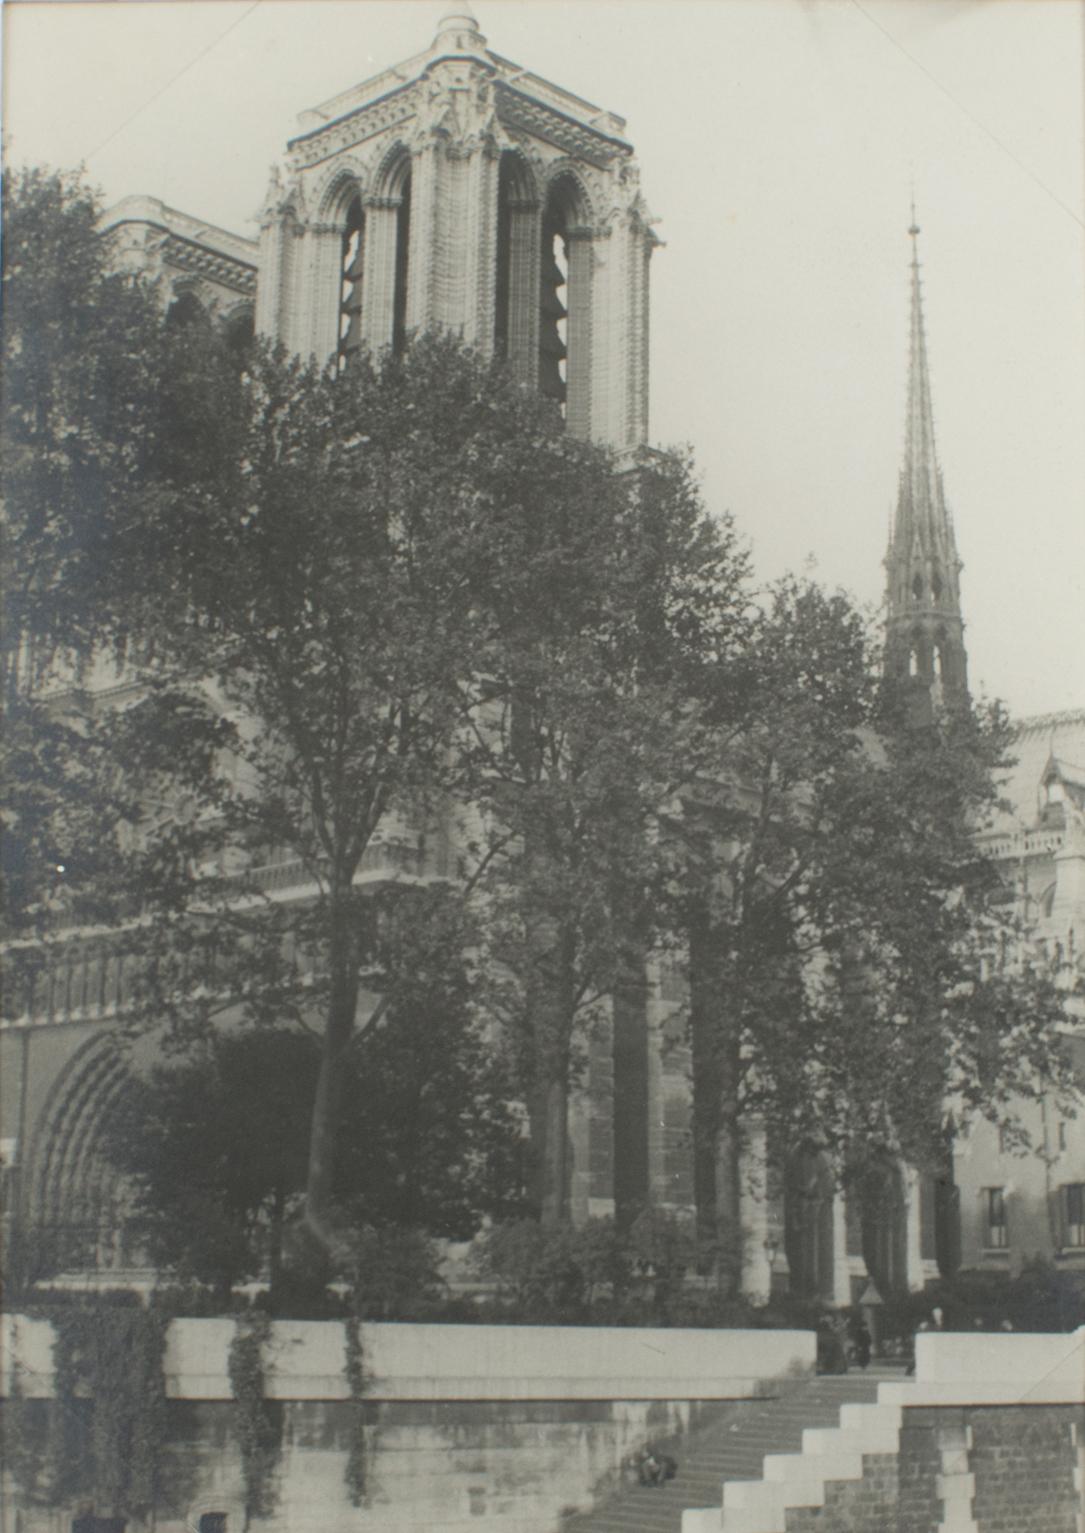 A unique original silver gelatin black and white photography. A view of Paris with Notre Dame Cathedral, June 1927.
Features:
Original Silver Gelatin Print Photography Unframed.
Press Photography.
Press Agency: Anonymous.
Photographer: